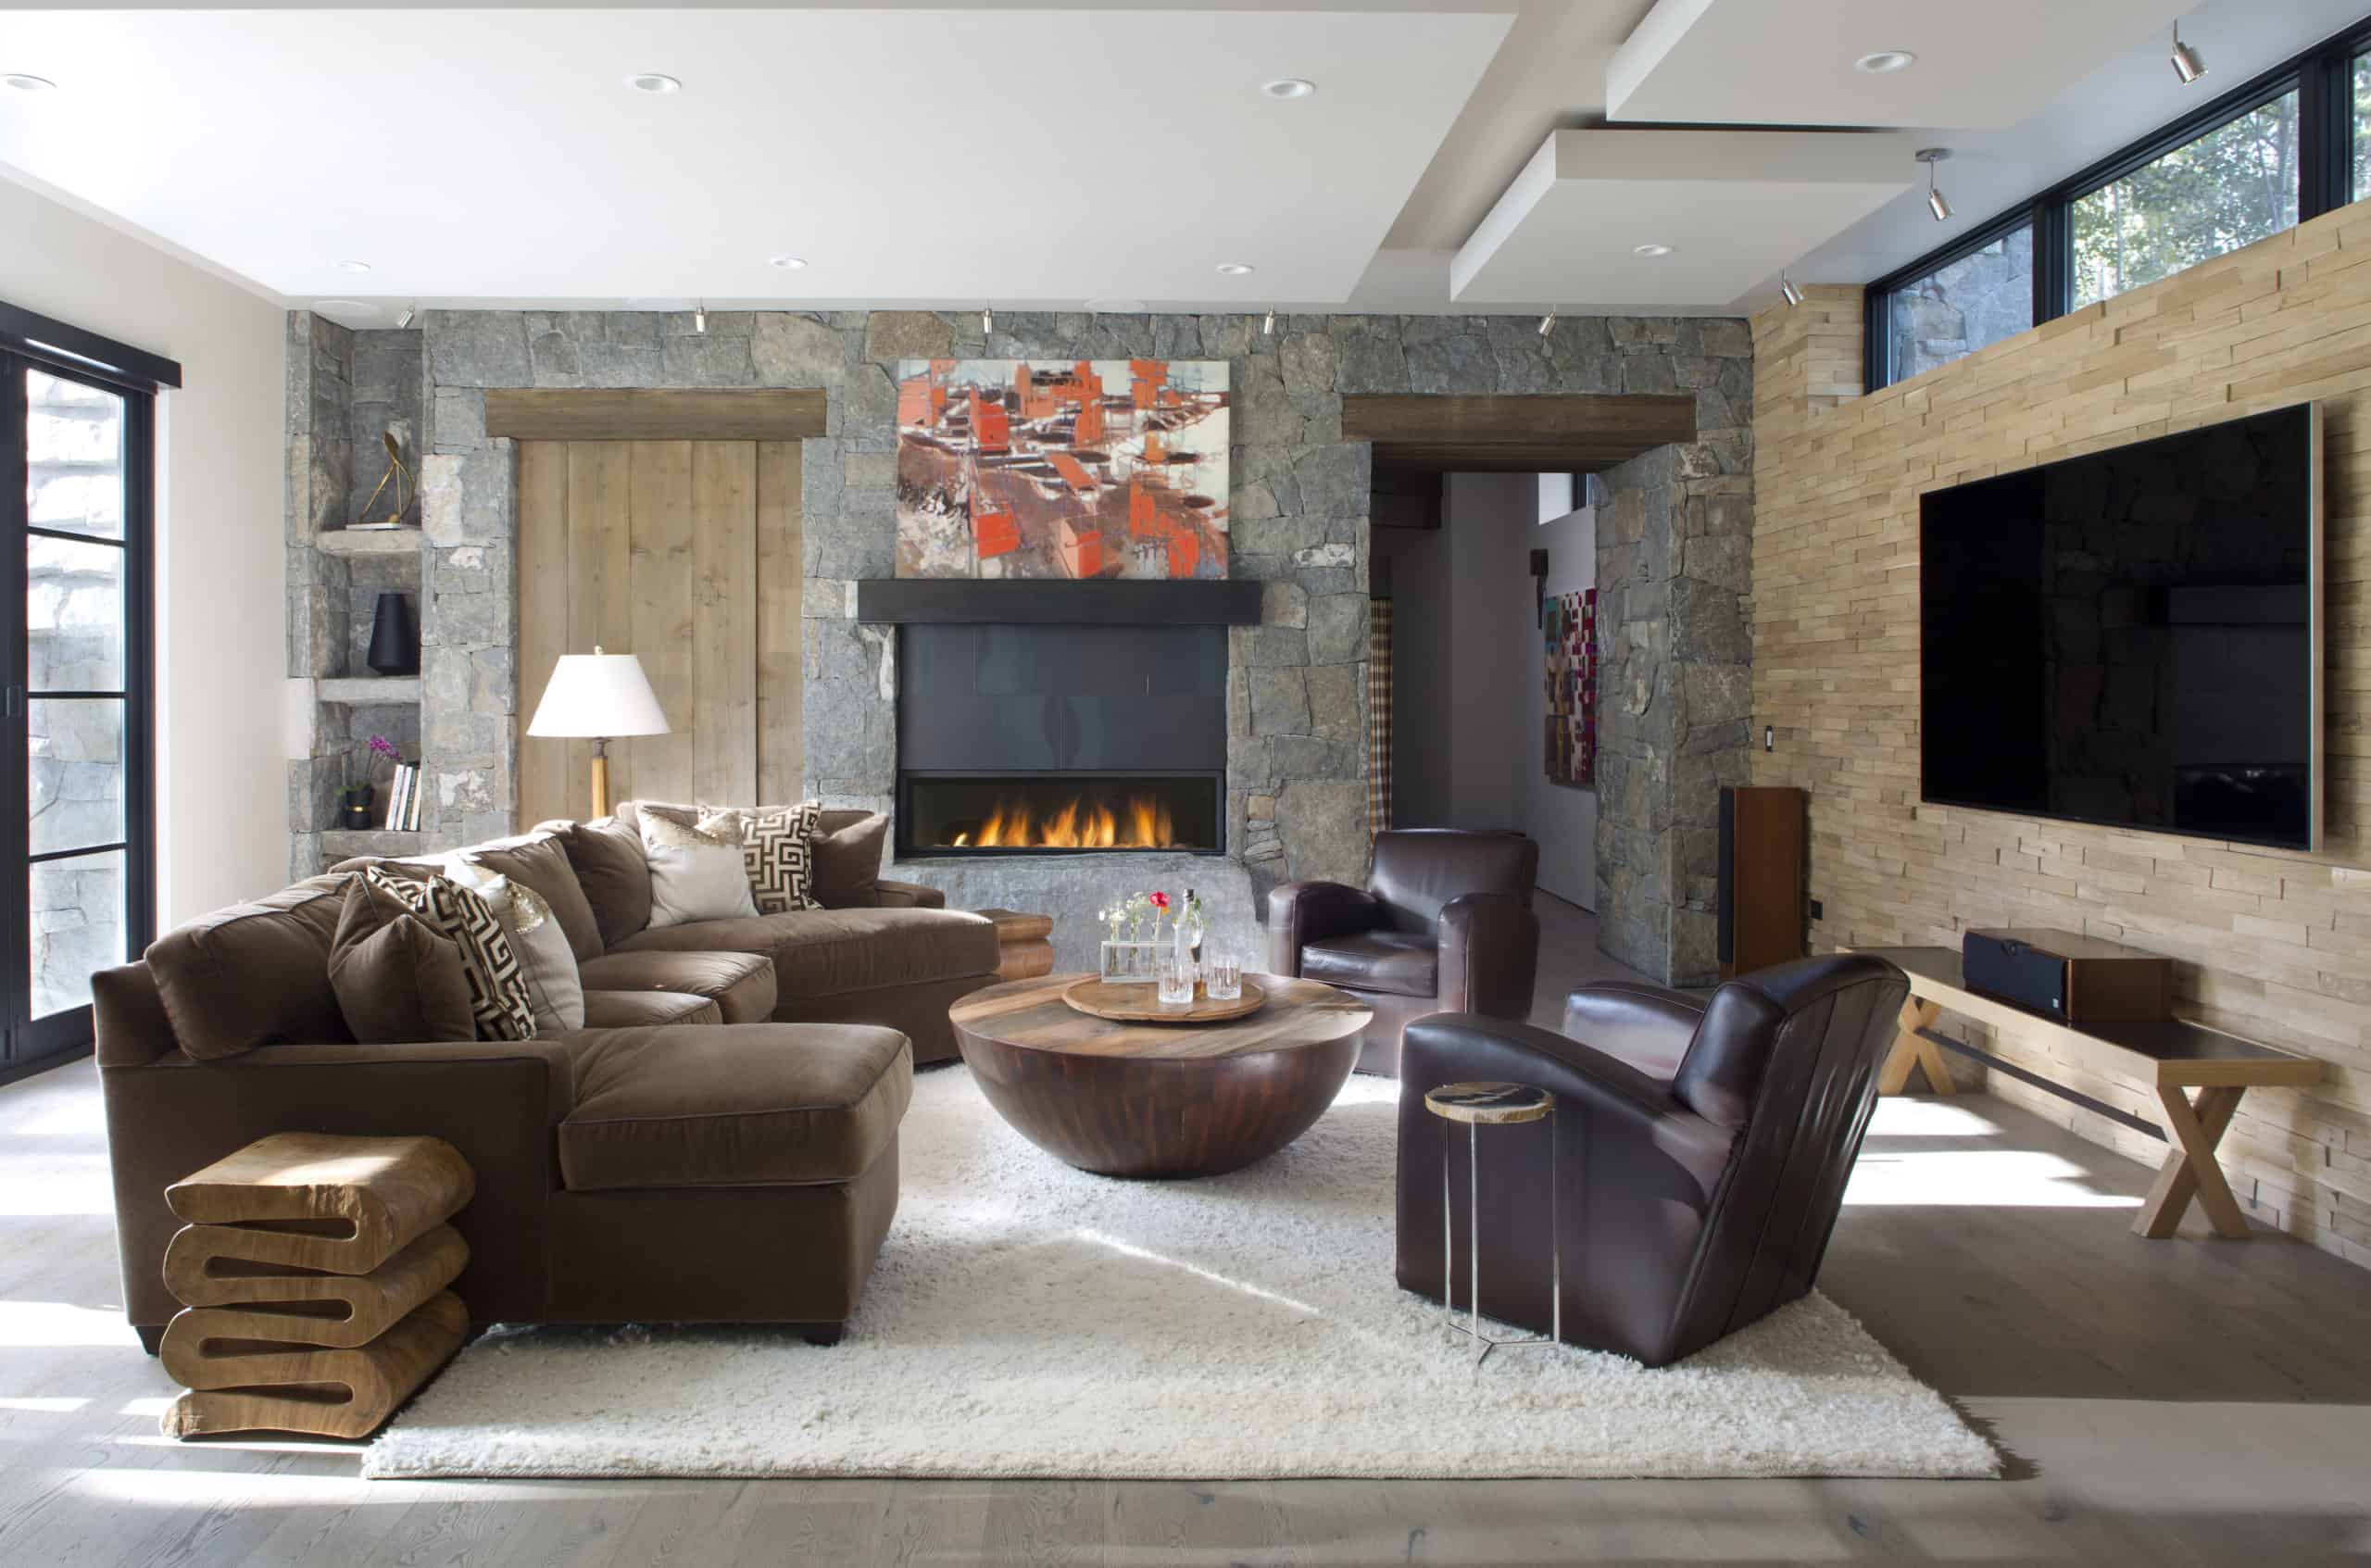 Cozy lodge style family room furnishings